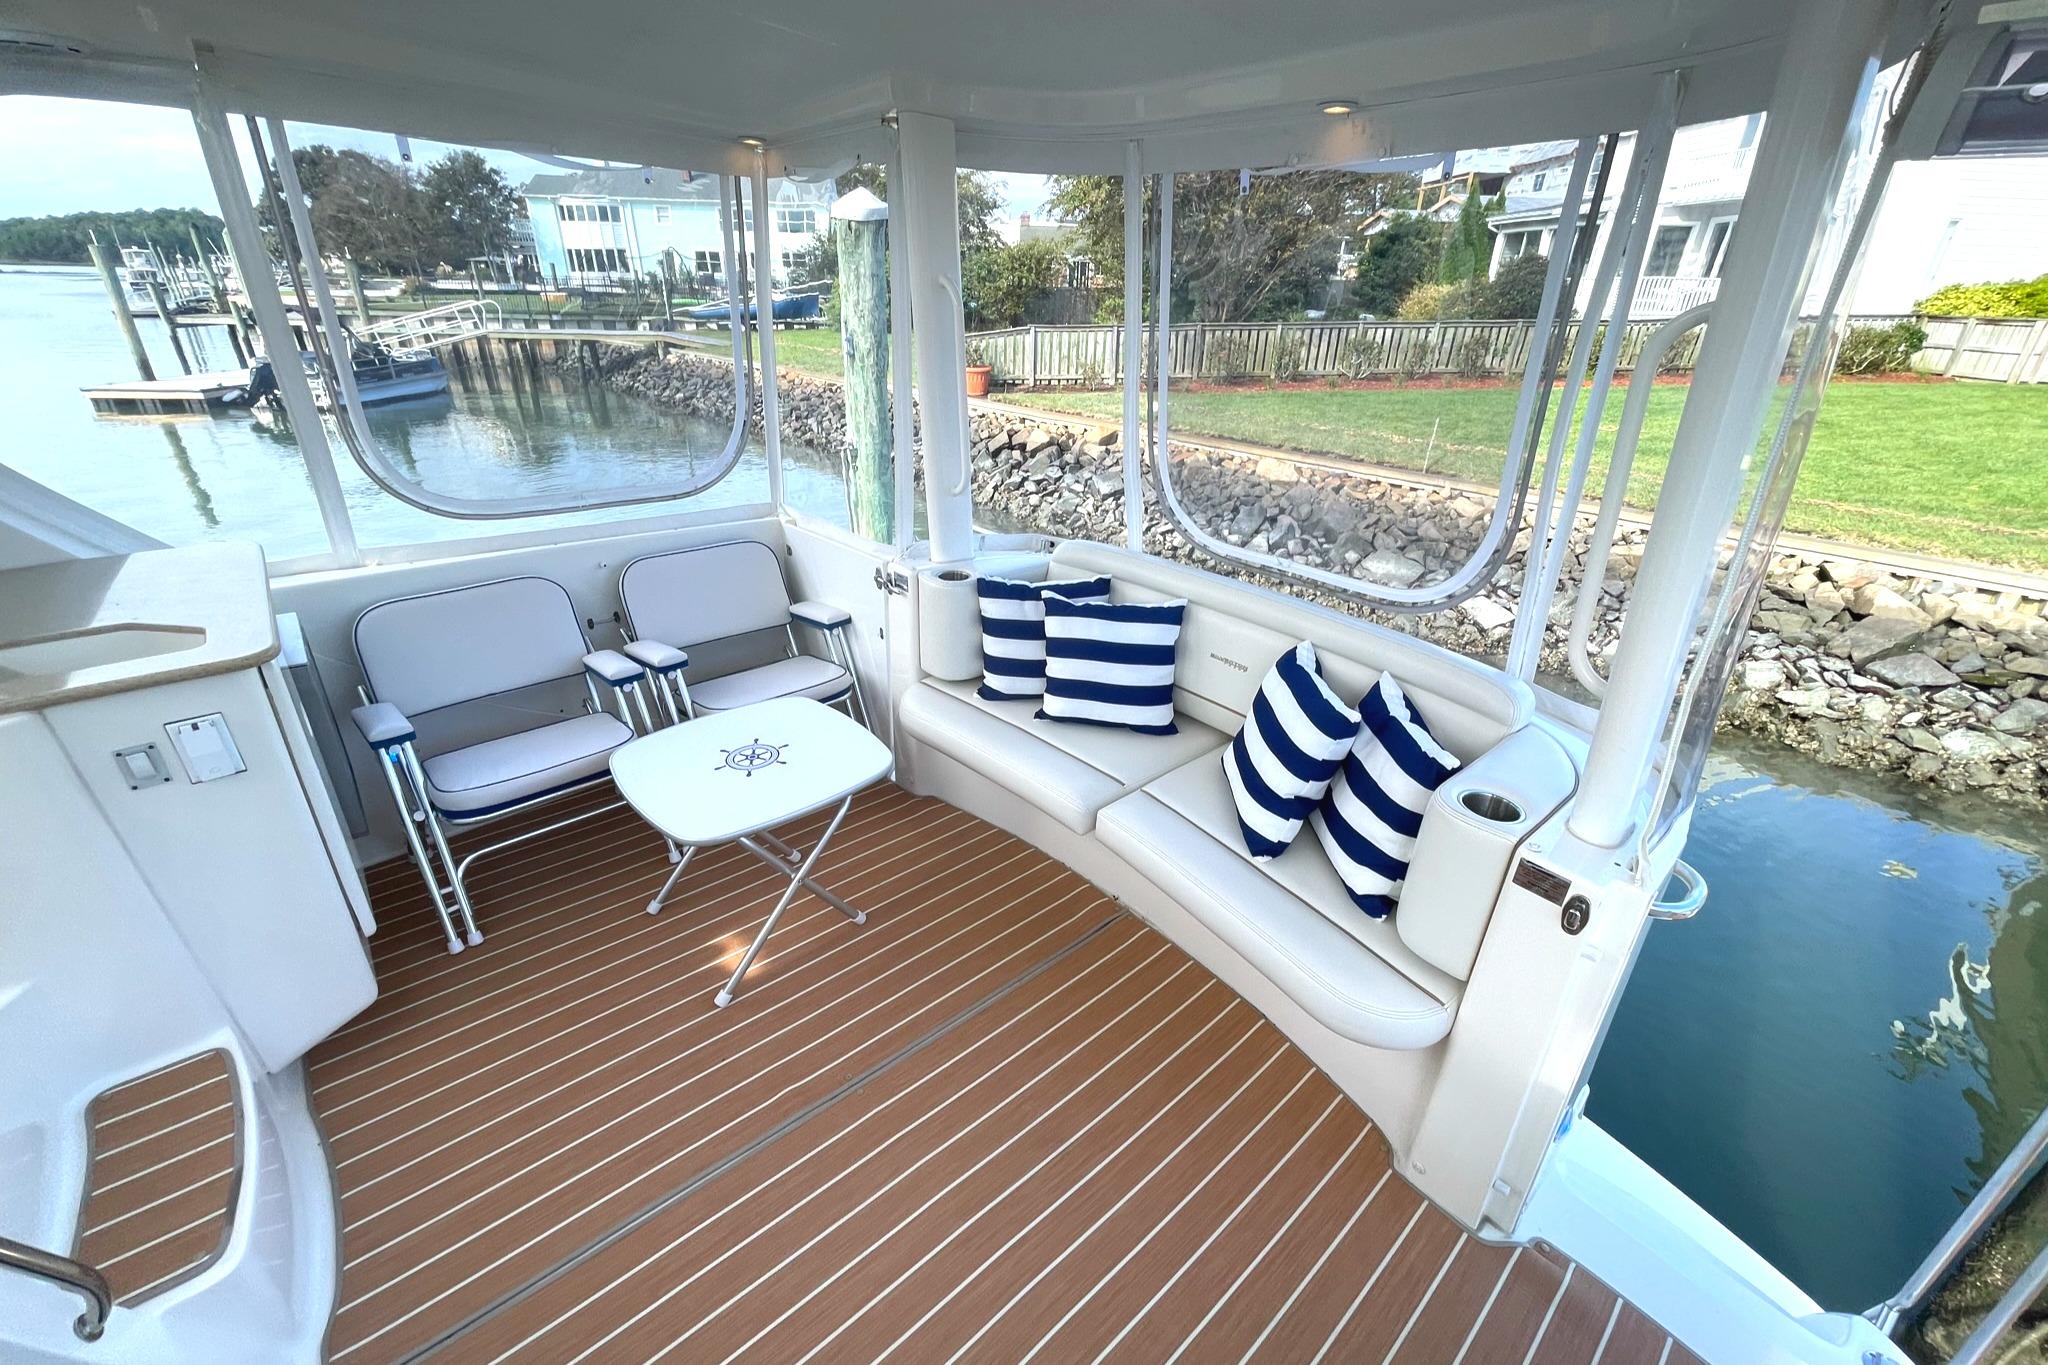 AFT DECK TO STBD.